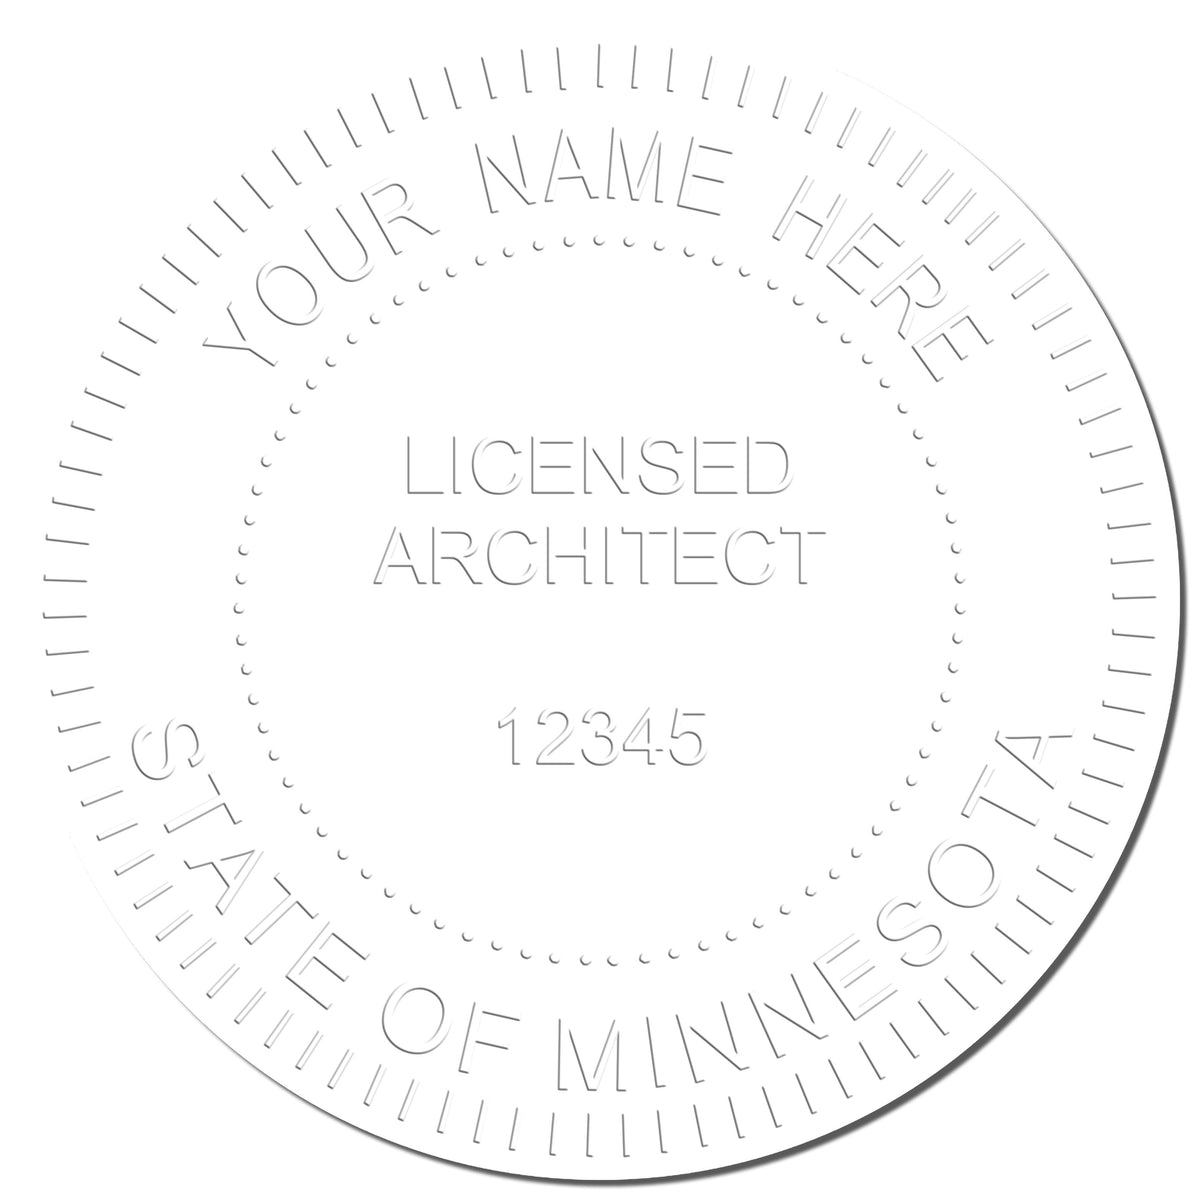 This paper is stamped with a sample imprint of the Heavy Duty Cast Iron Minnesota Architect Embosser, signifying its quality and reliability.